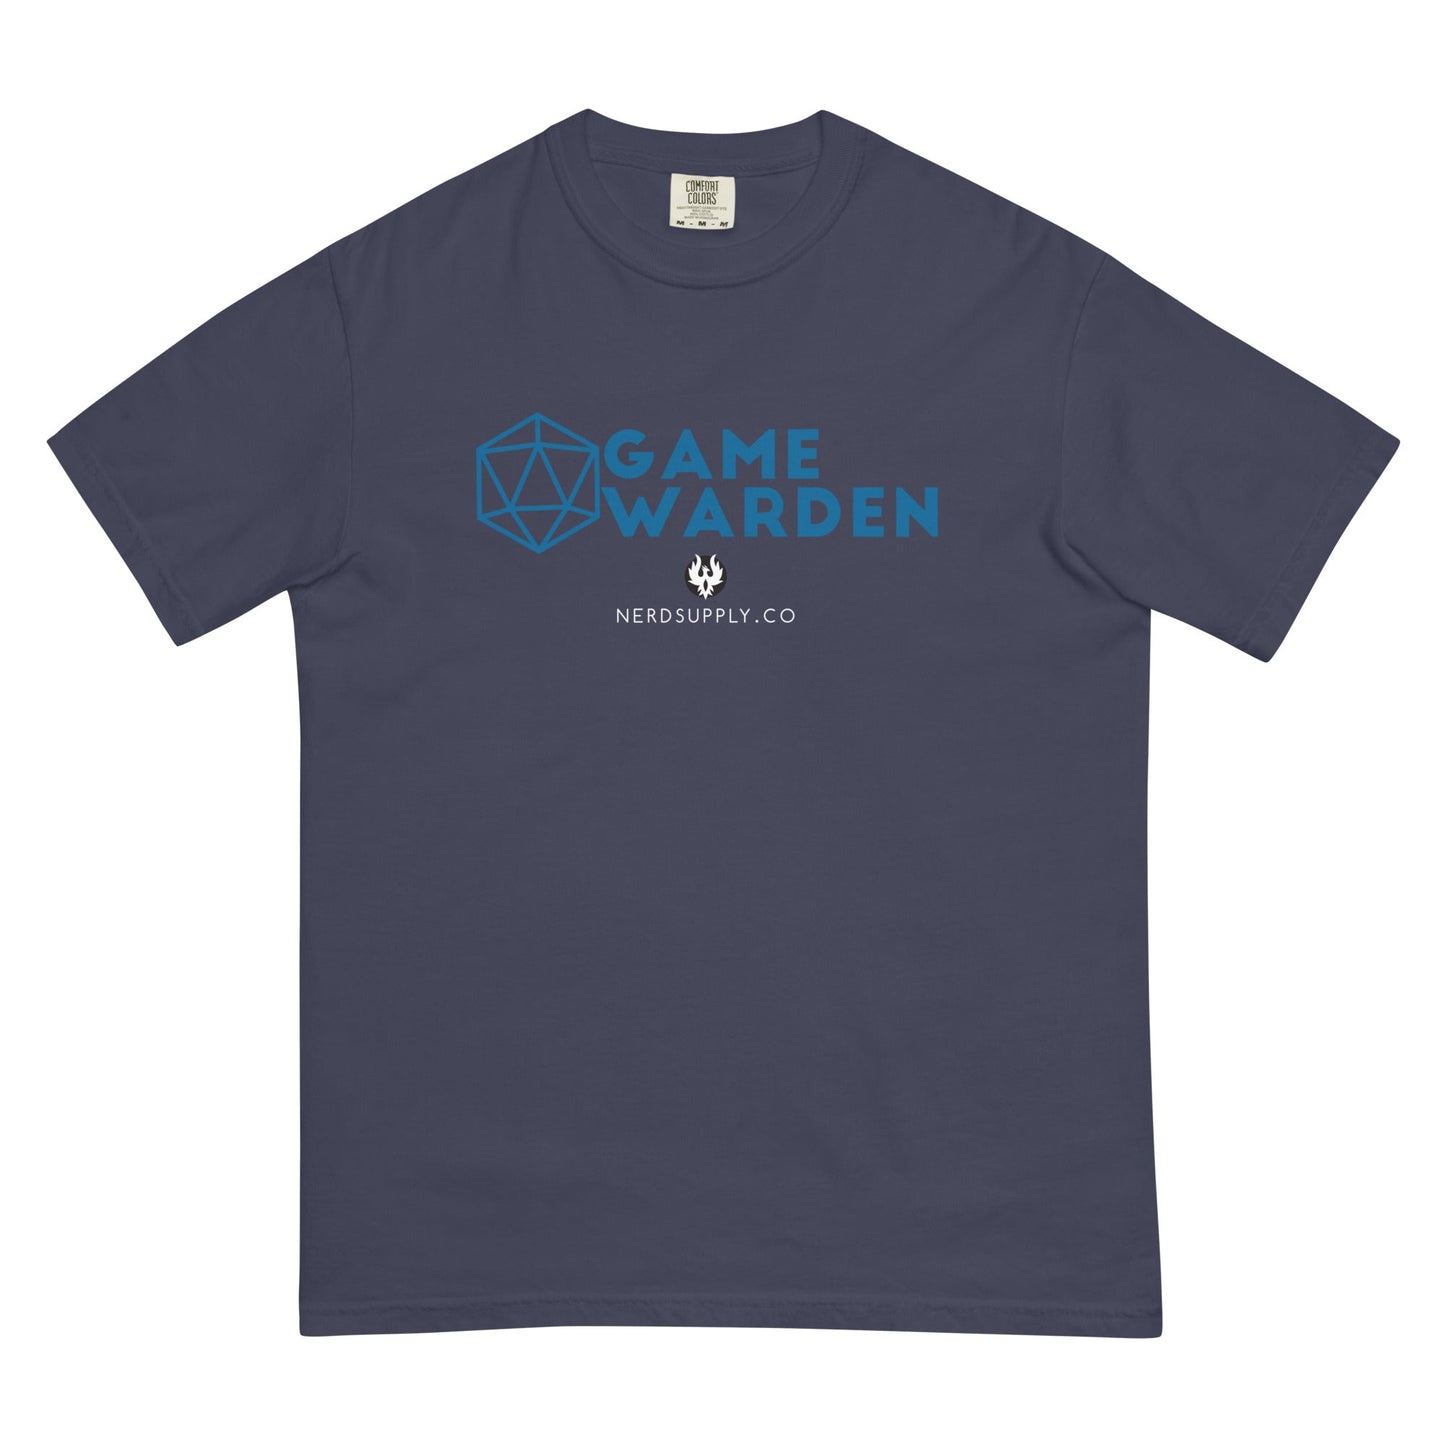 "Game Warden" - t-shirt - The Nerd Supply Company